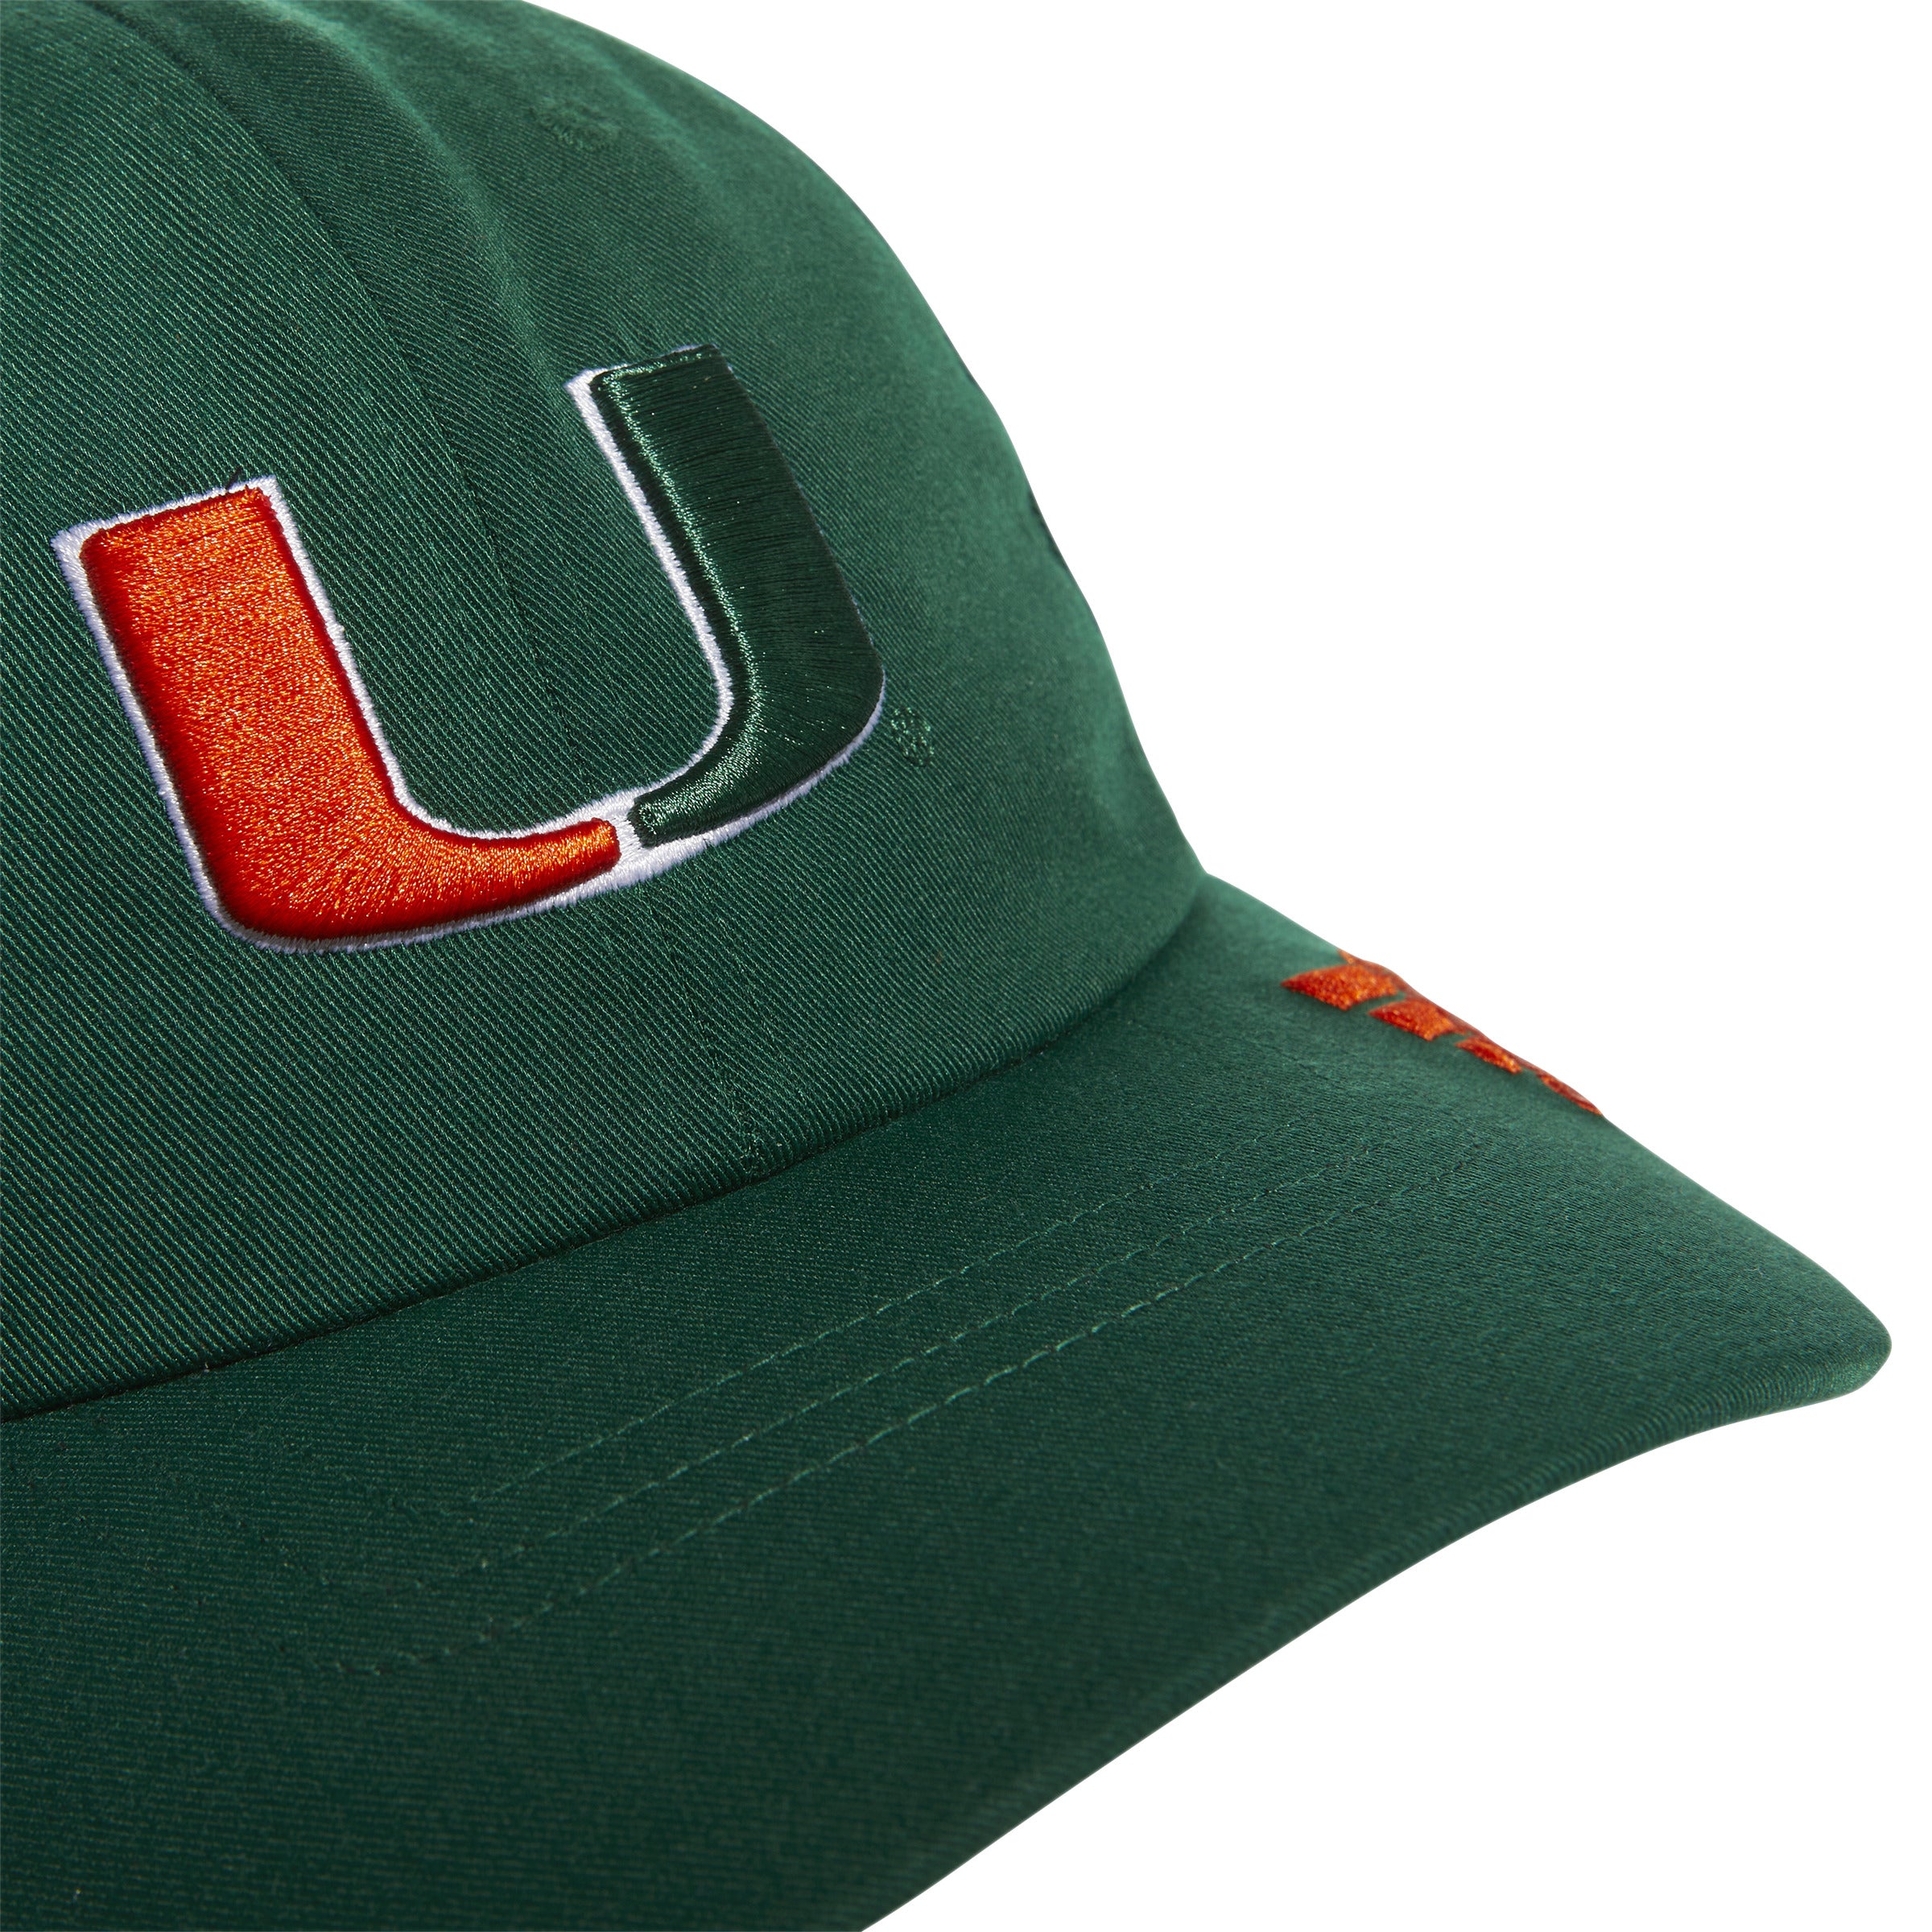 Miami Hurricanes adidas Adjustable Slouch Hat - Green